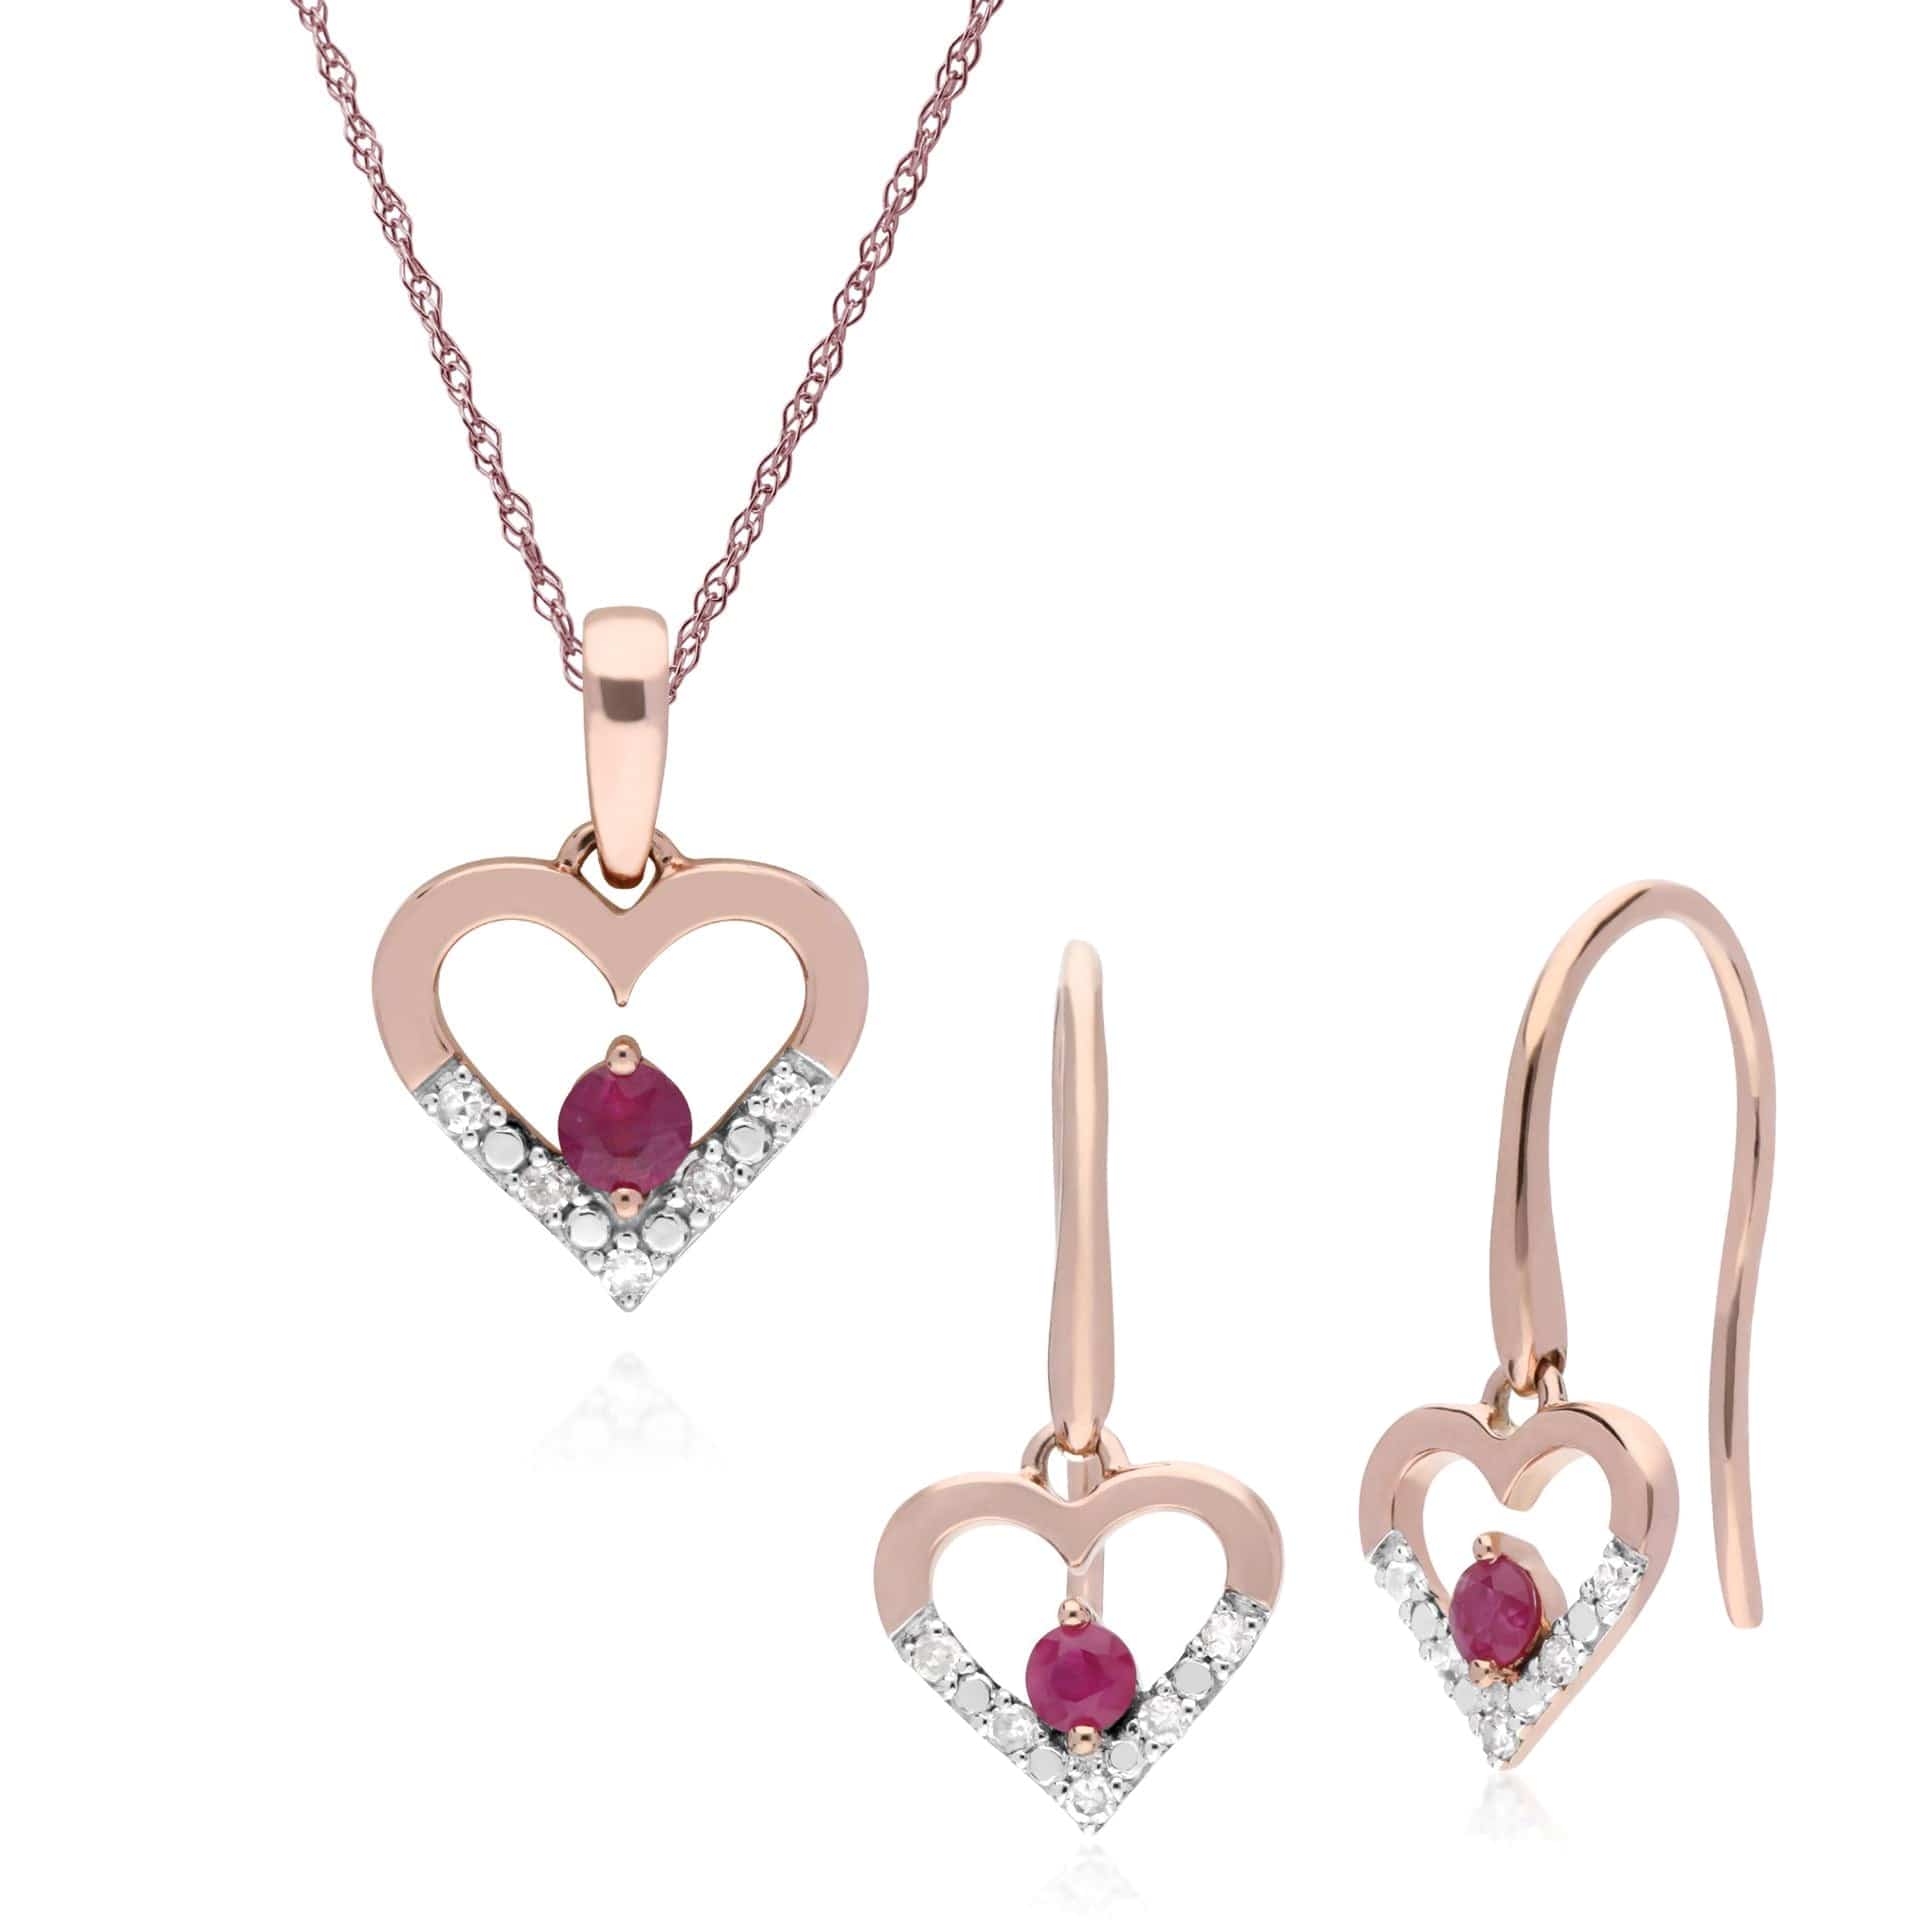 135E1580019-135P1921019 Classic Round Ruby & Diamond Heart Drop Earrings & Pendant Set in 9ct Rose Gold 1